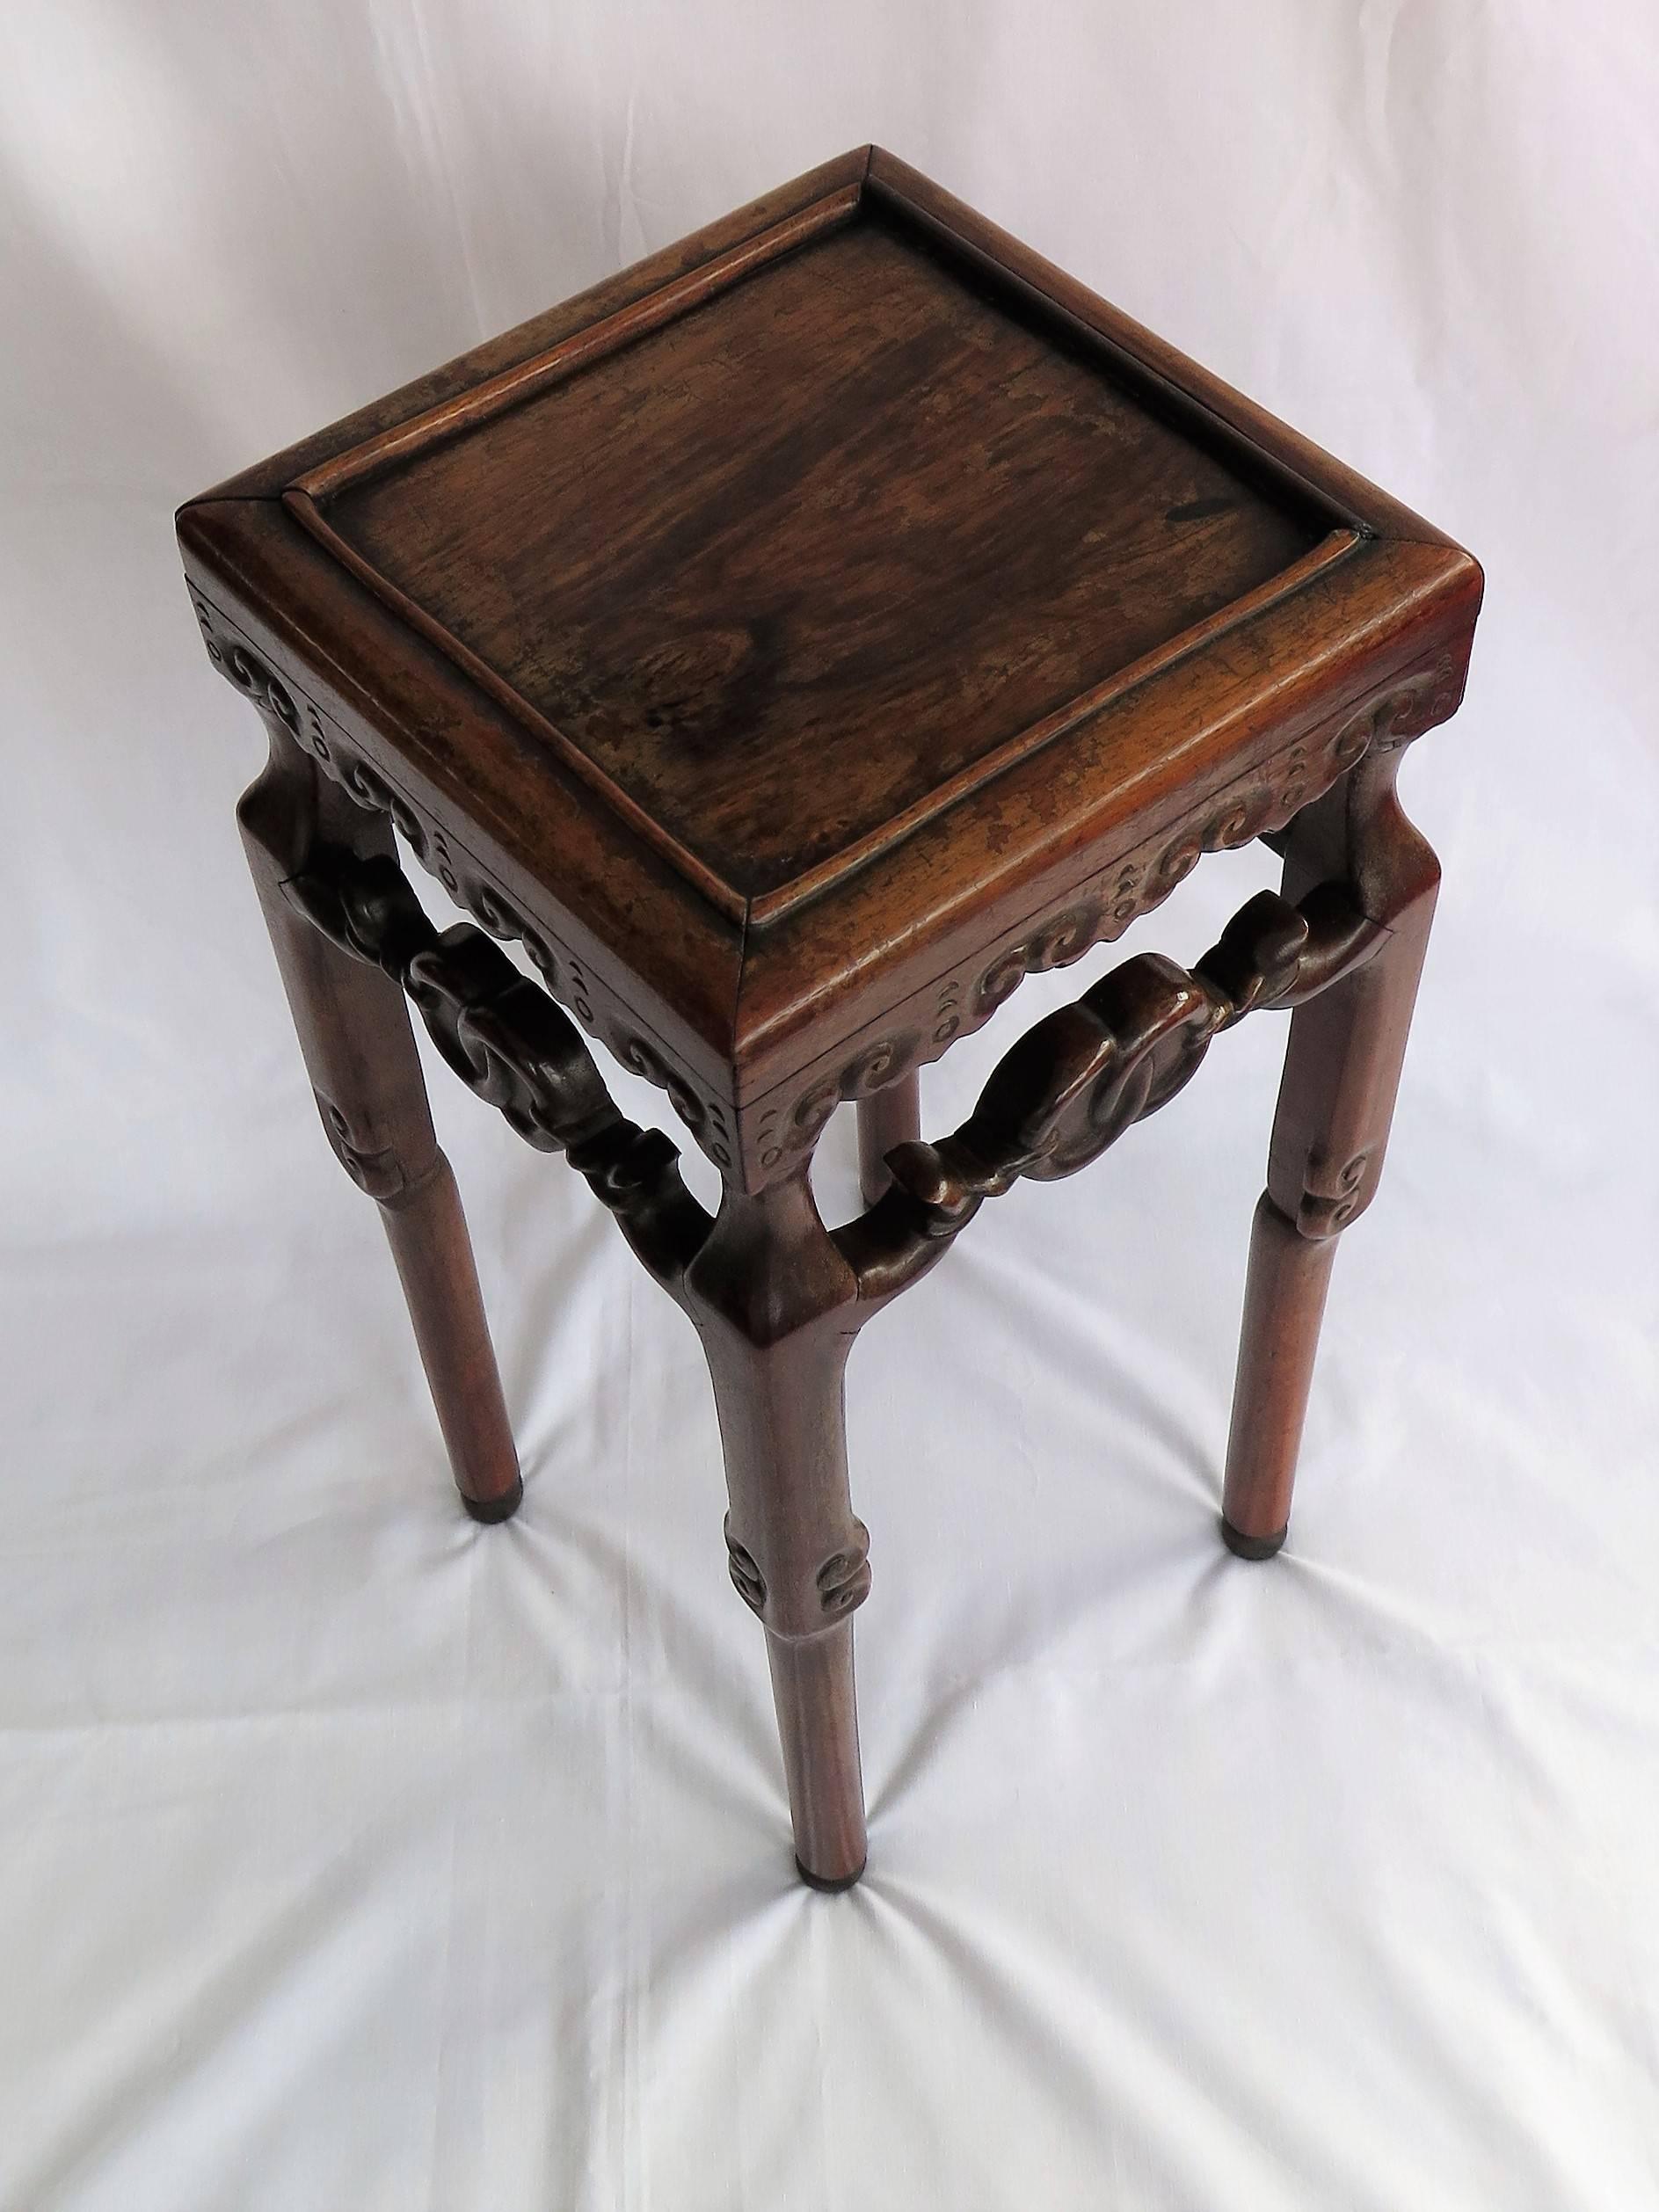 Hand-Carved Chinese Hongmu Hardwood Stand or Side Table, 19th Century Qing